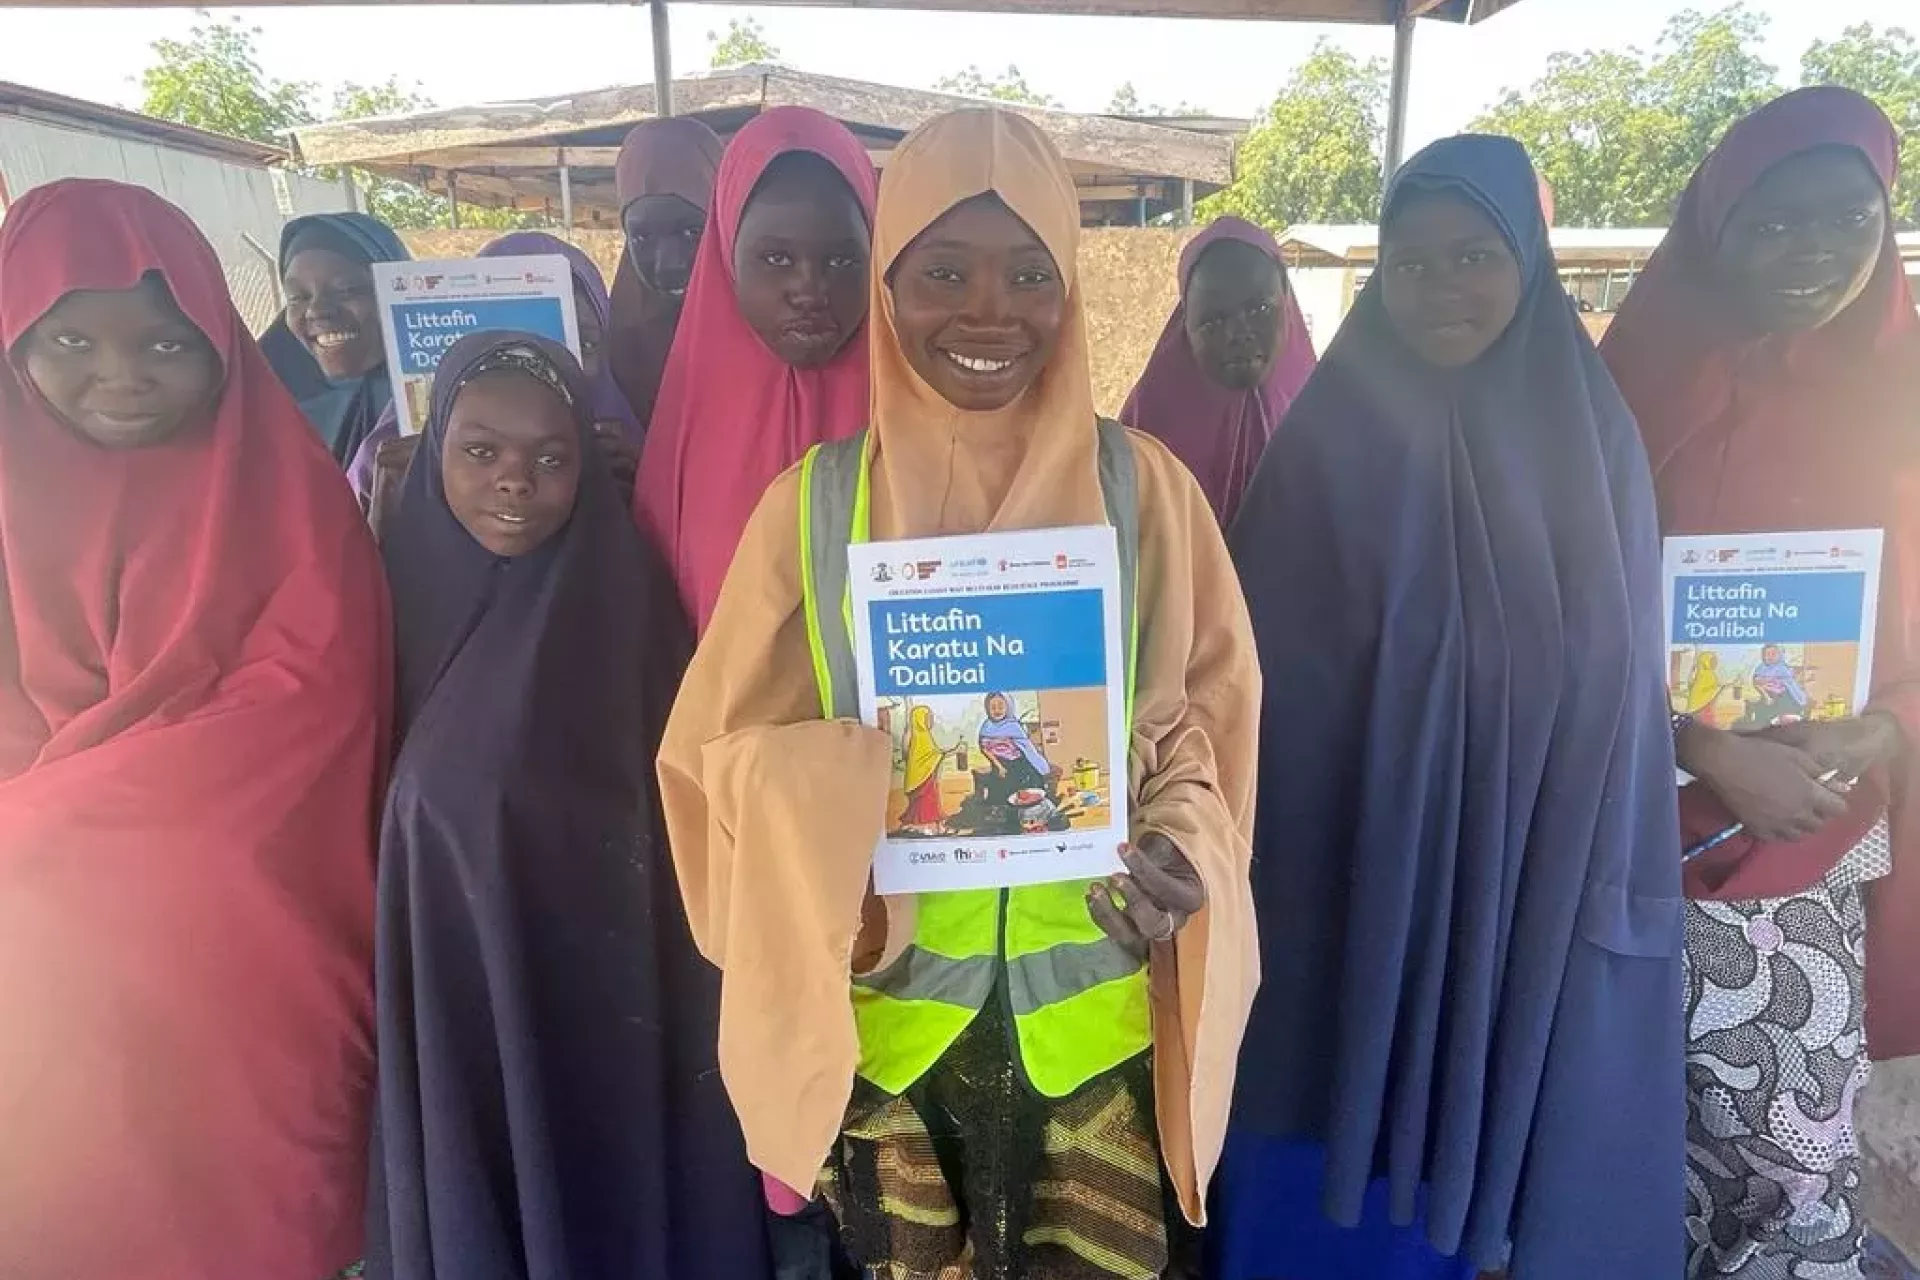 A former student is back to her UNICEF-supported school in northeast Nigeria, as a teacher for schoolgirls affected by conflict.